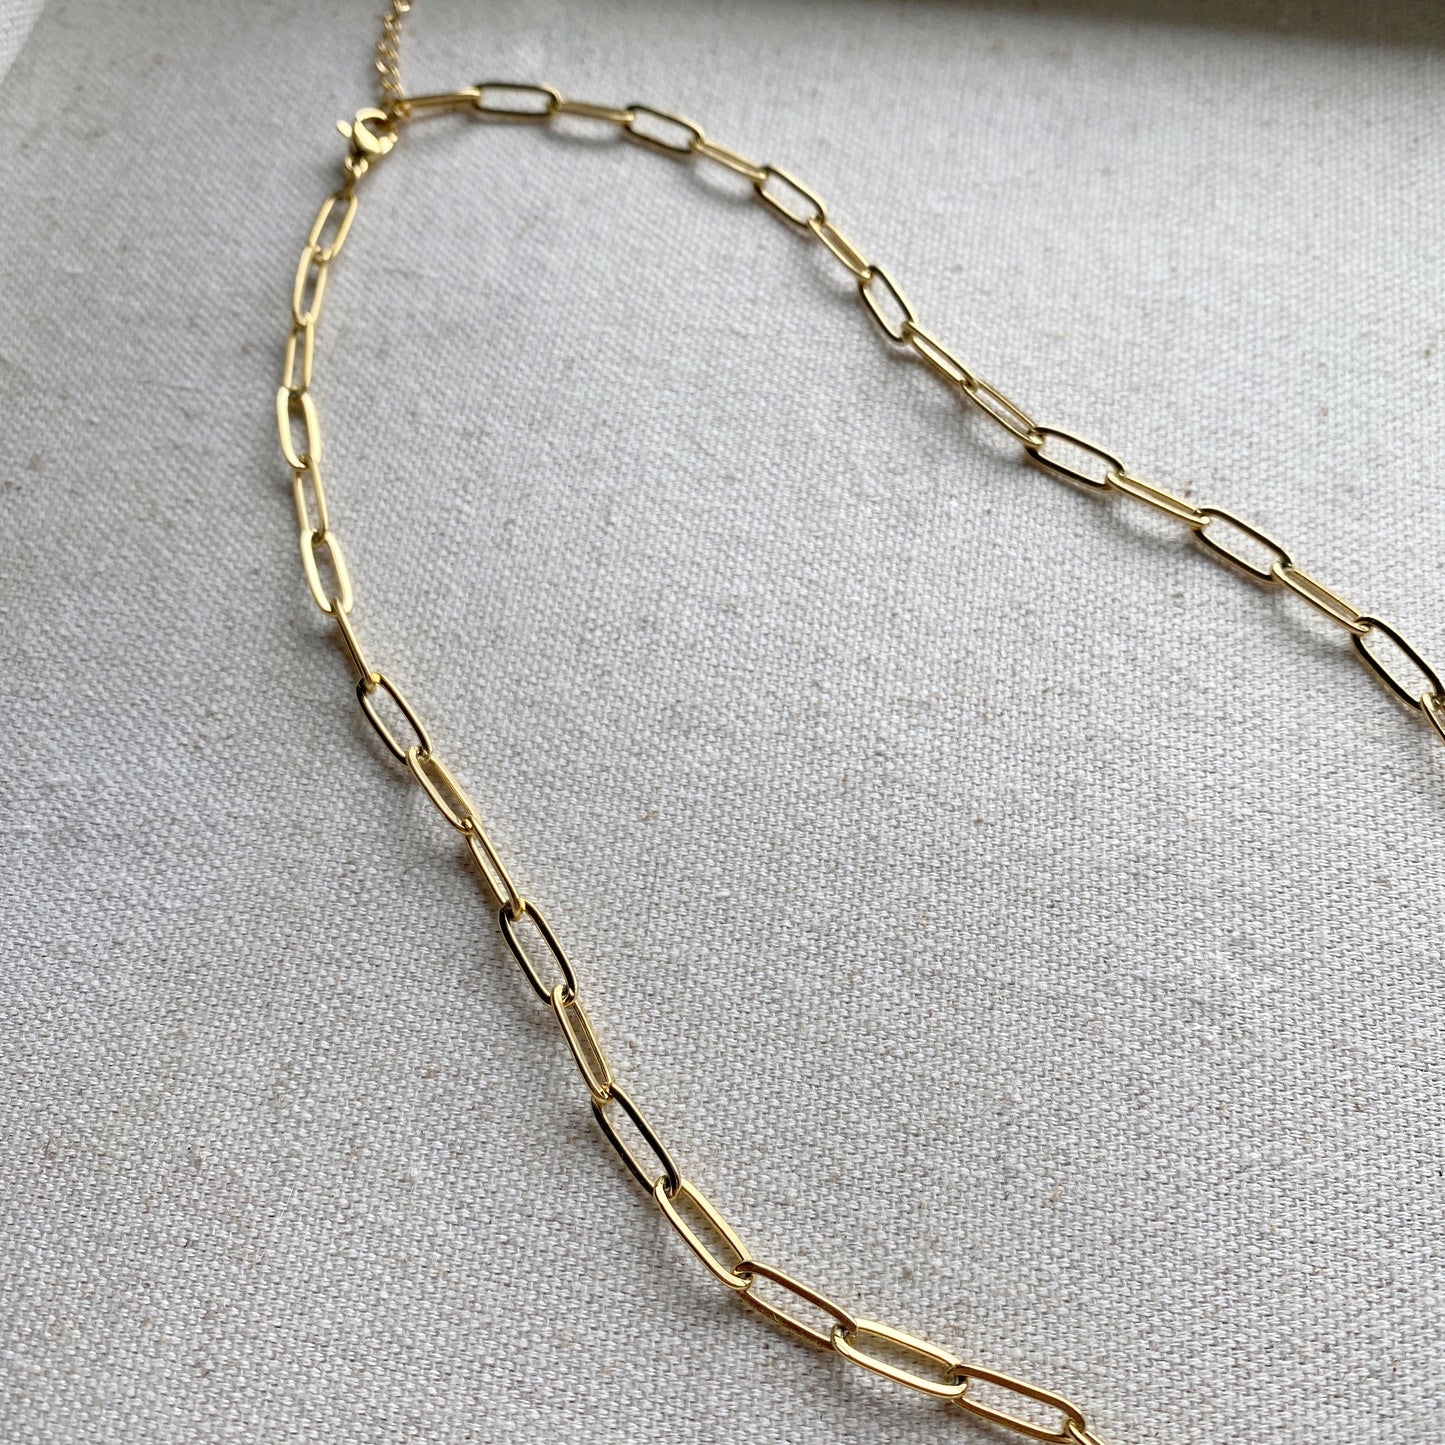 Stainless Steel Gold Chain Necklace  Gold chain necklace, Stainless steel  chain necklace, Chunky chain necklaces